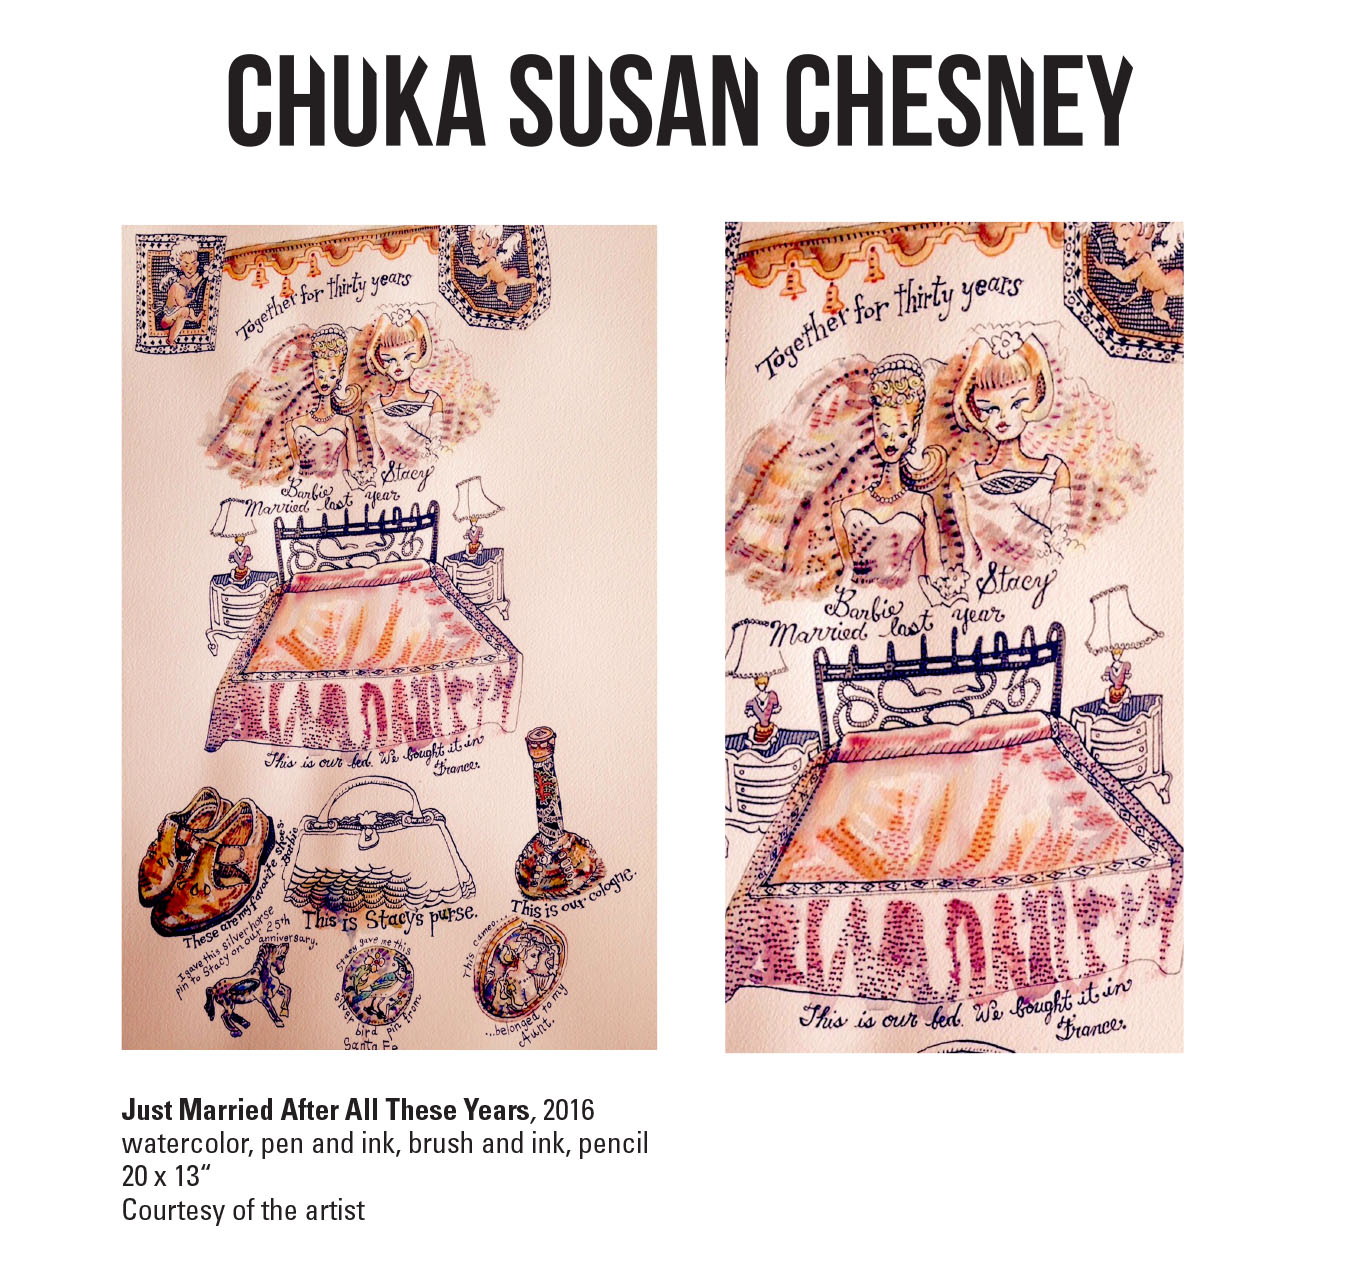 Chuka Susan Chesney, Just Married After All These Years, 2016. Watercolor, pen and ink, brush and ink, pencil. 20 x 13“ Courtesy of the artist. An ink and watercolor artwork that depicts a two women married women with a bed in the center and miscellaneous objects around 